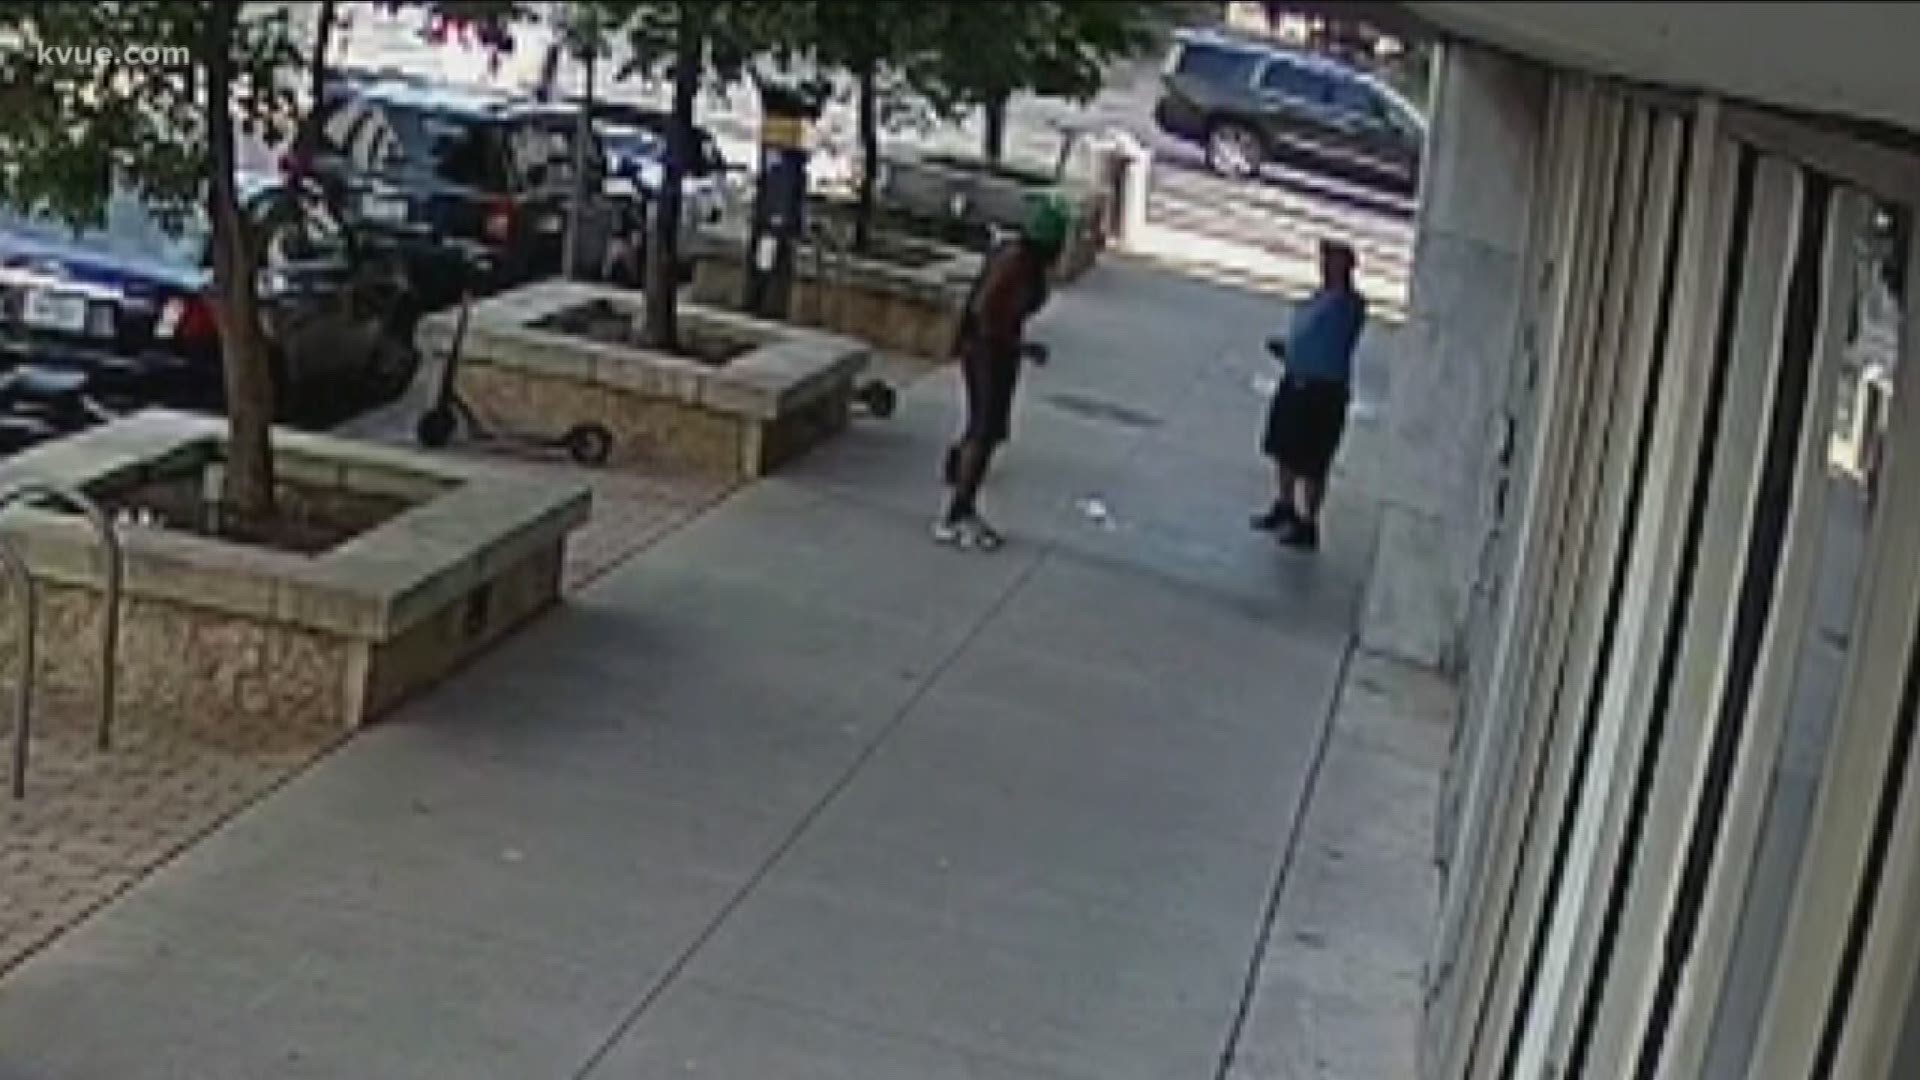 A lot of people are talking about surveillance video that shows one person attacking another outside an office building on Brazos Street in Downtown Austin.